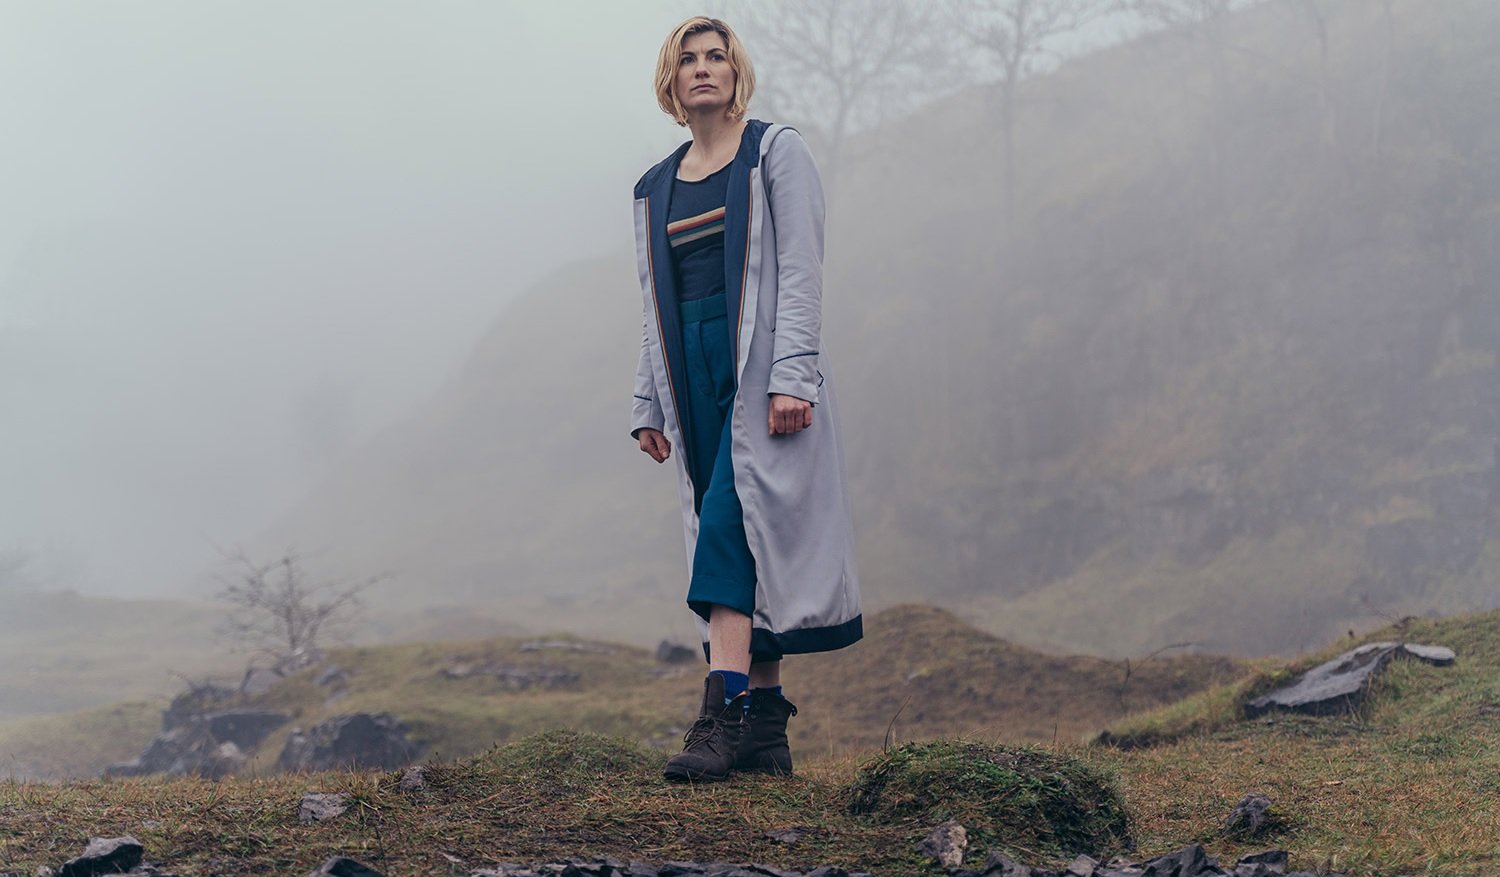 What Did You Think of Doctor Who: Flux – War of the Sontarans?